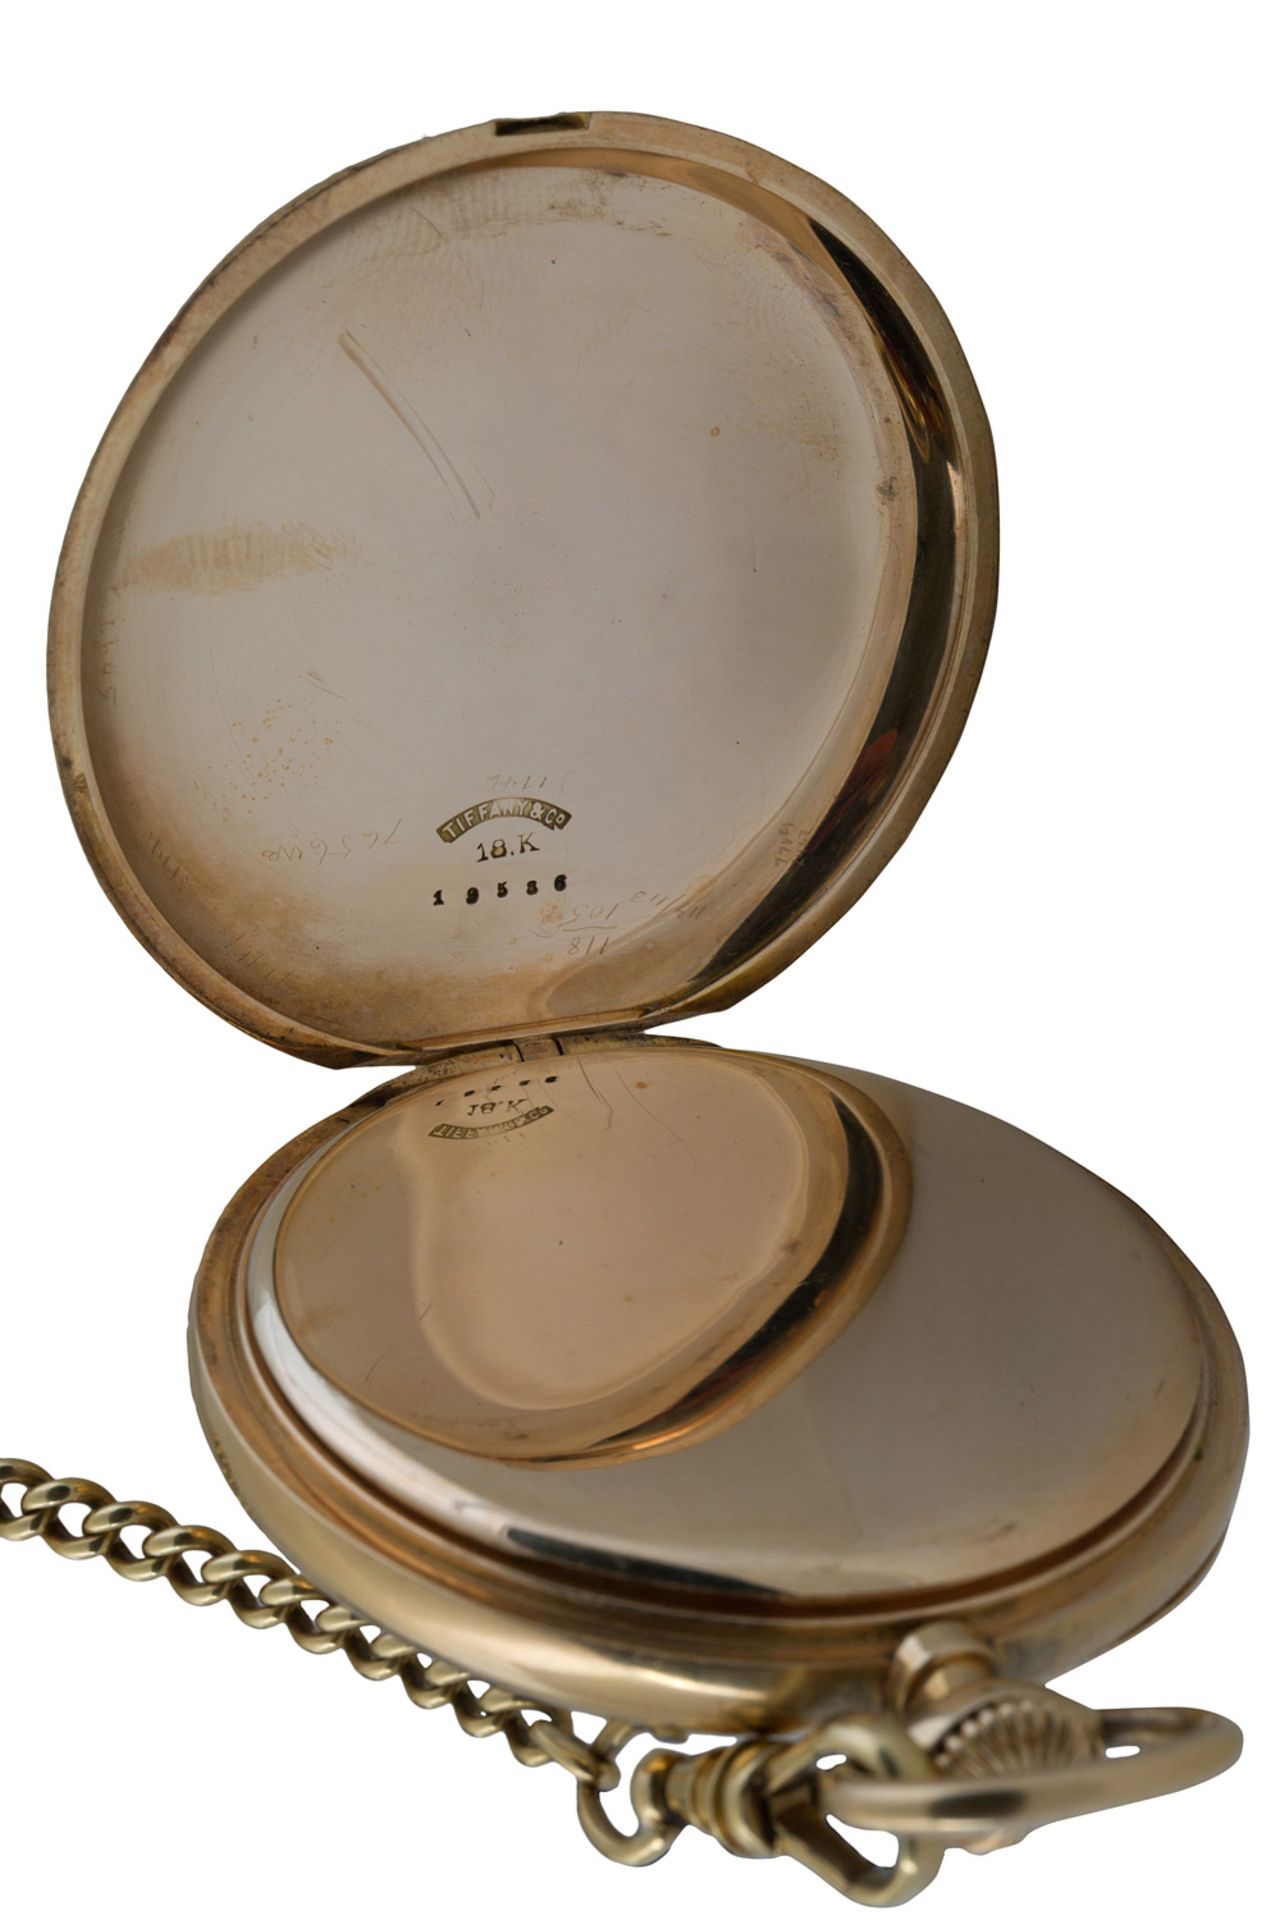 A TIFFANY & CO. 18K YELLOW GOLD POCKET WATCH WITH GOLD CHAIN, CASE NO. 19586 - Bild 3 aus 5